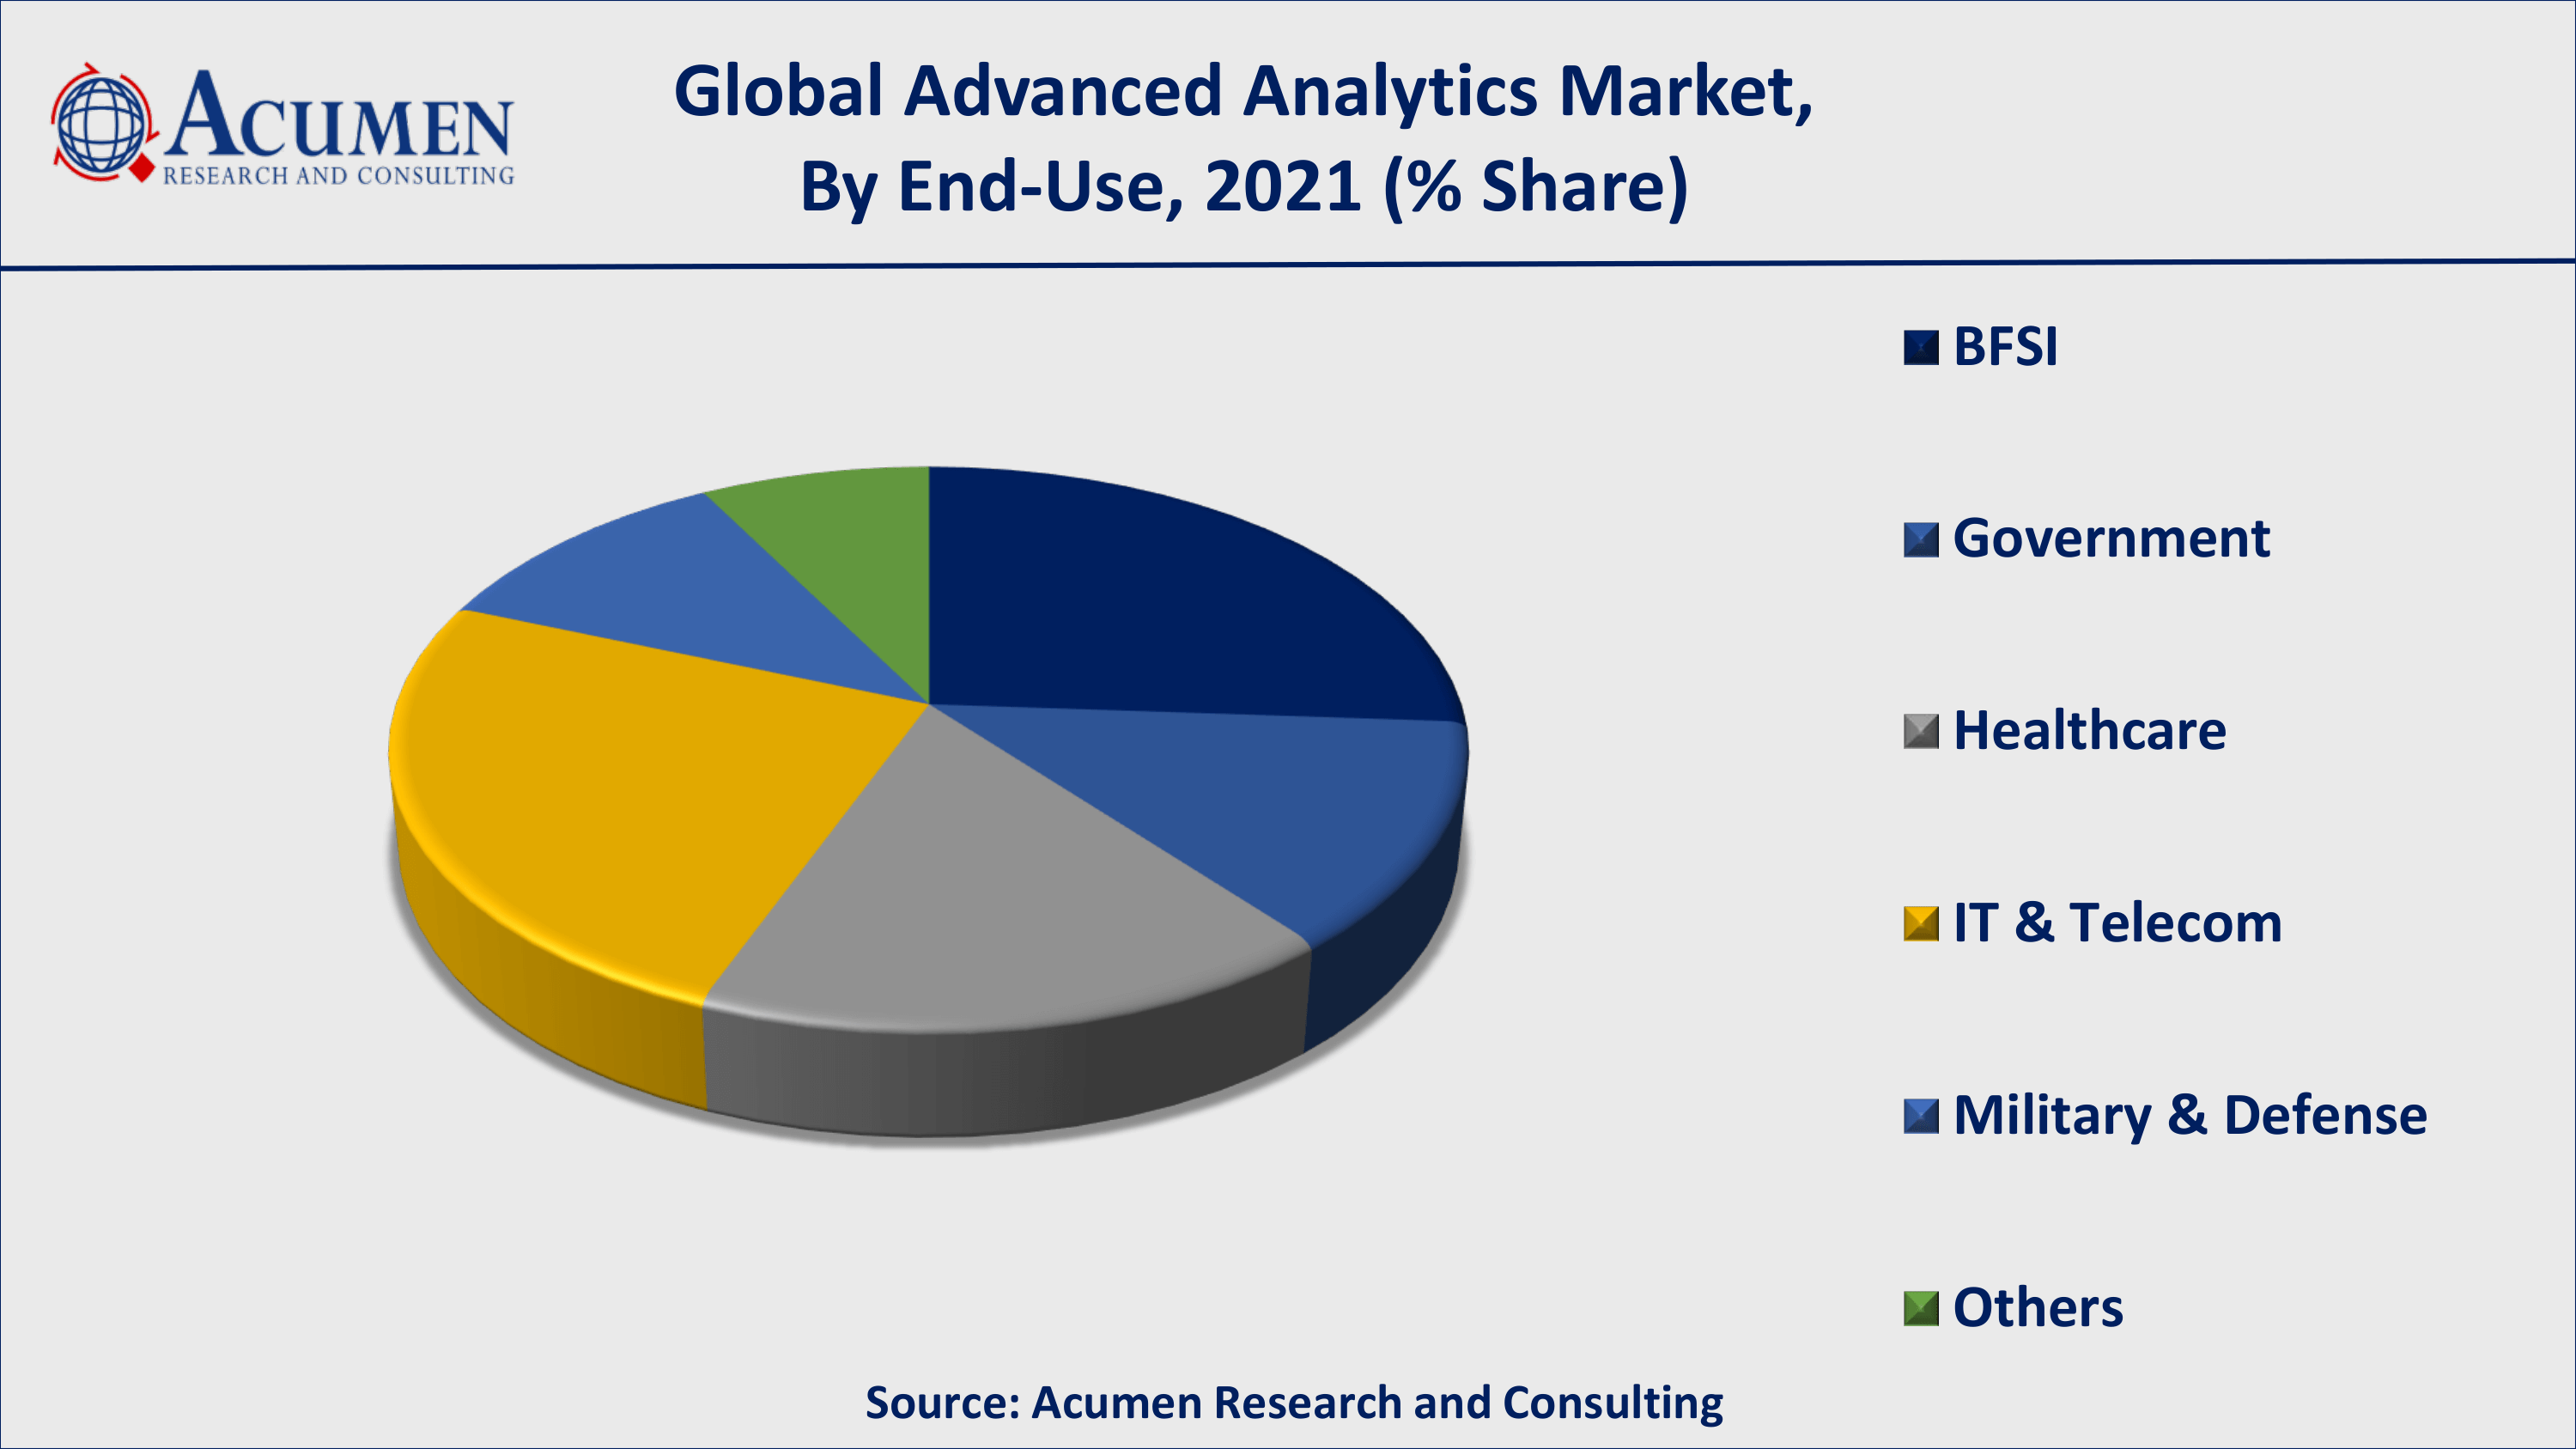 Advent of machine learning is a popular advanced analytics market trend that is fueling the industry demand